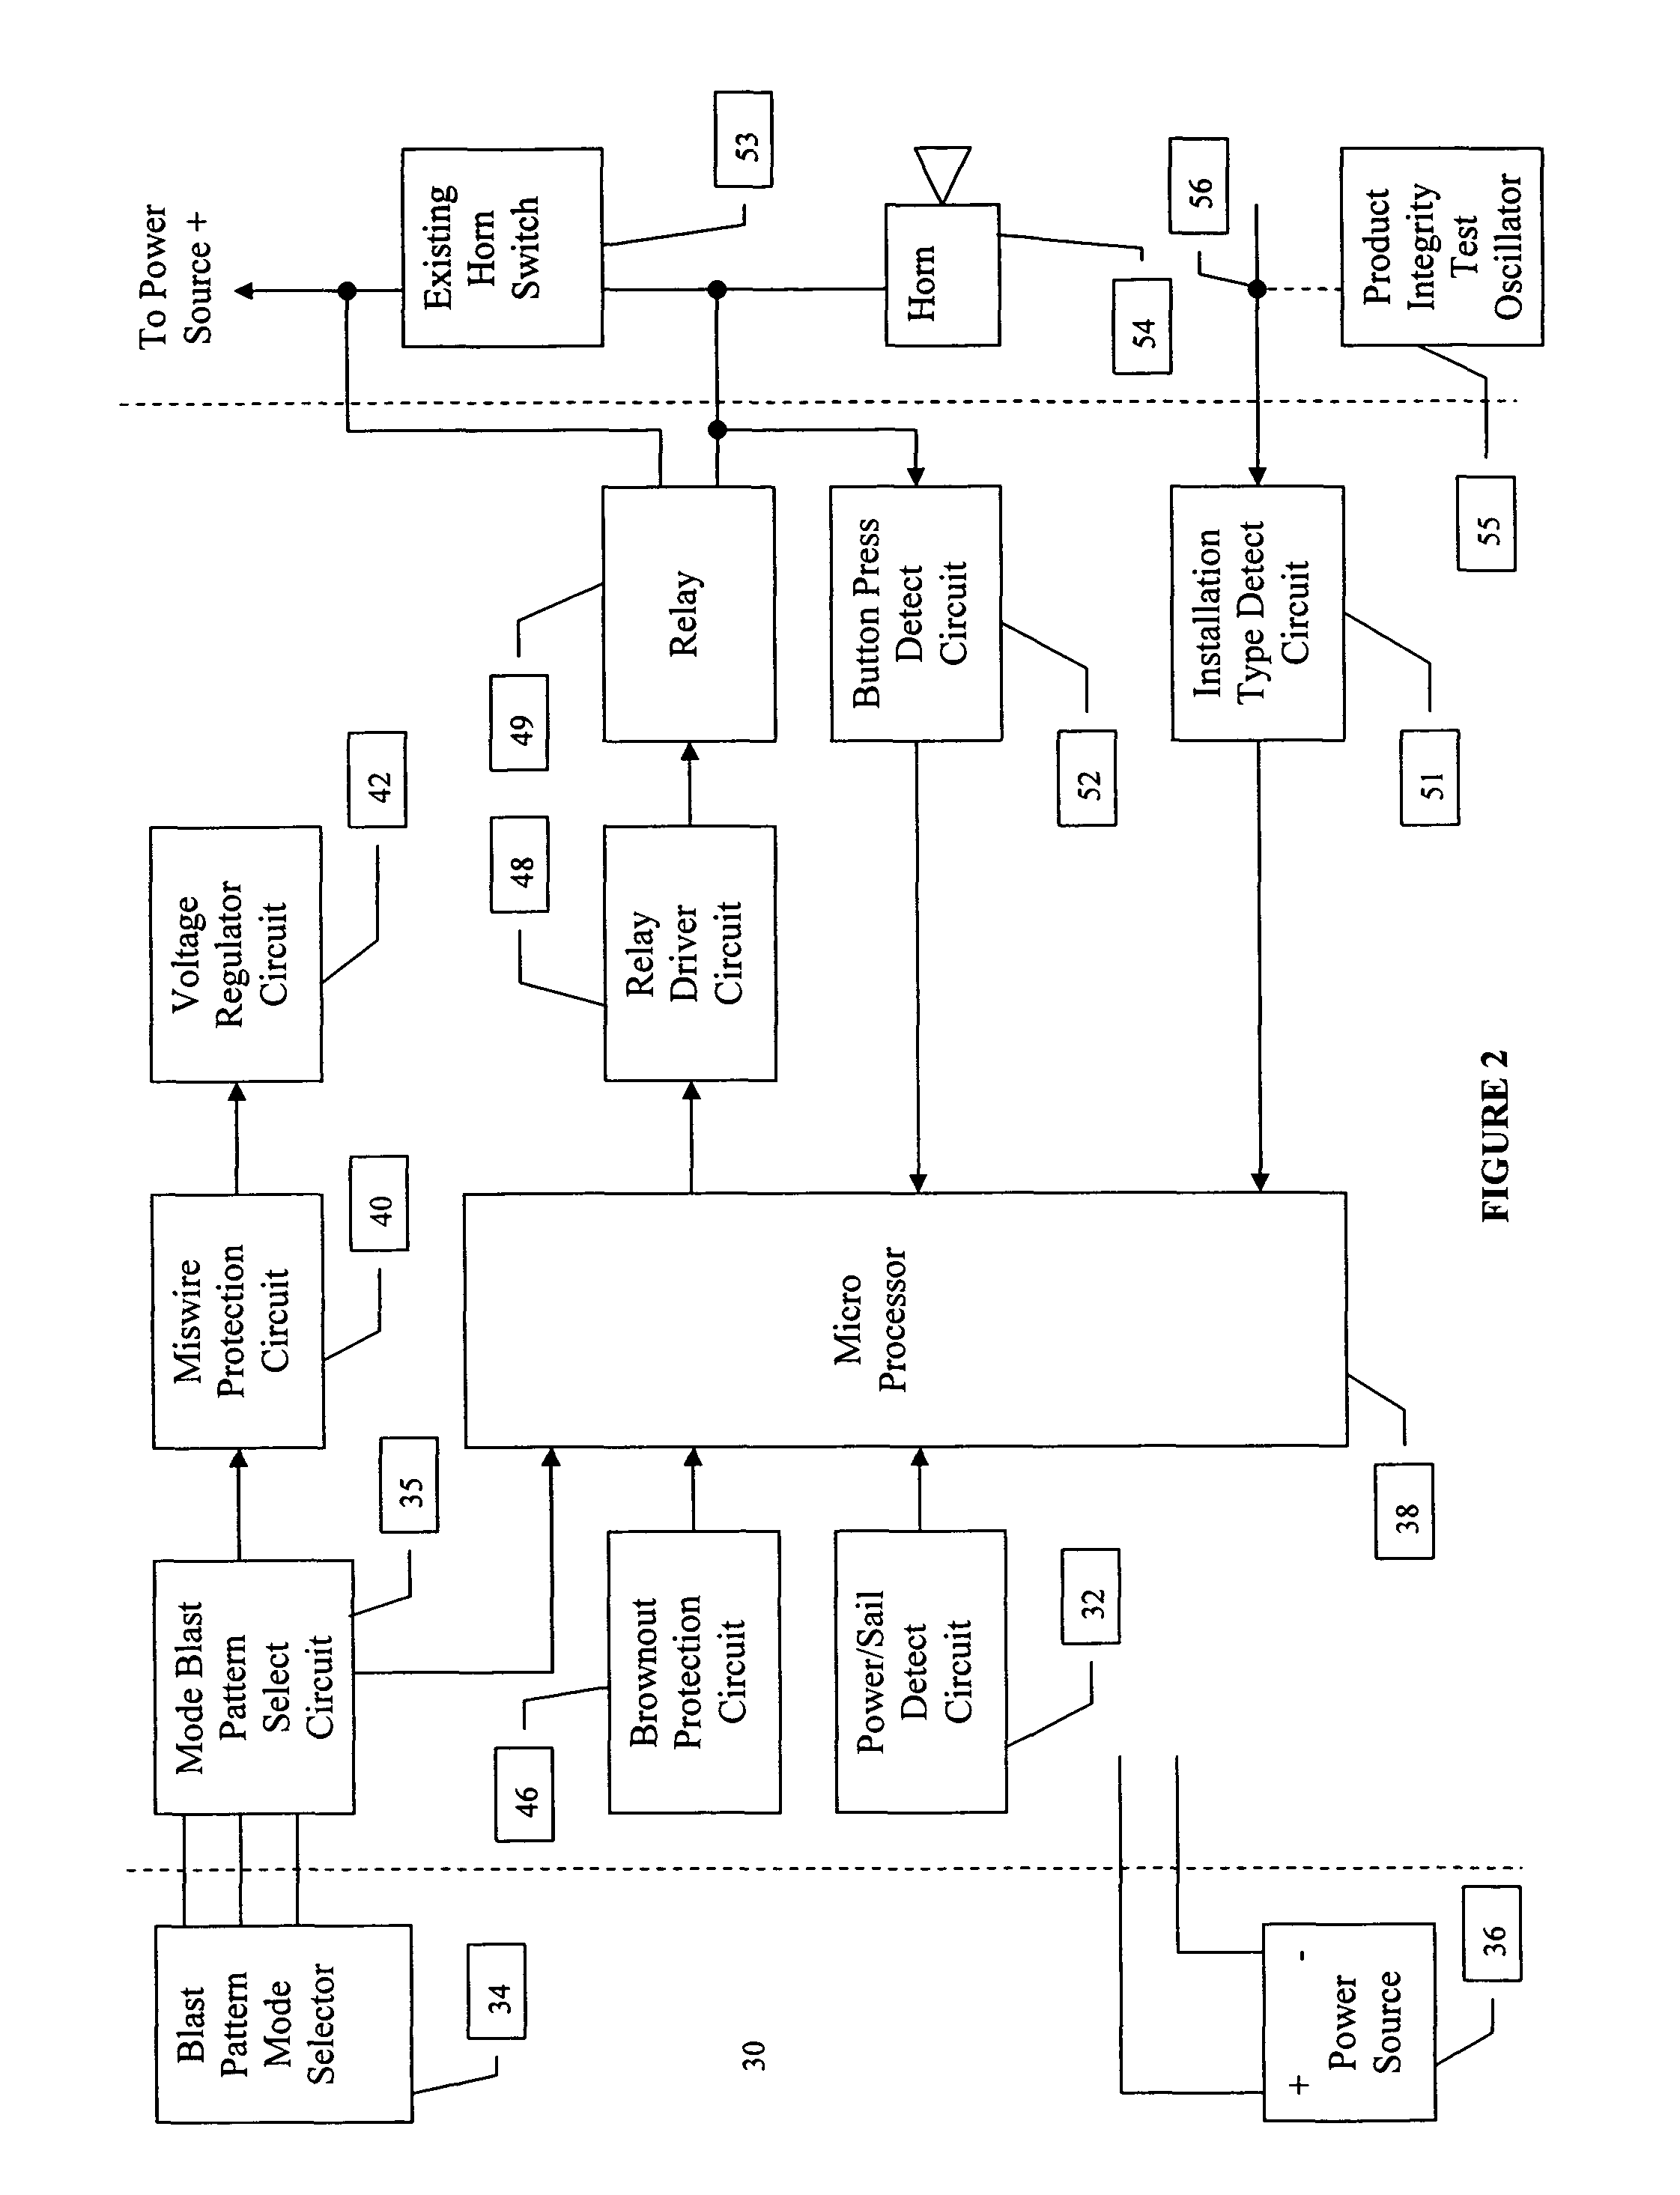 Controller for automatically manipulating a horn signal for navigational purposes